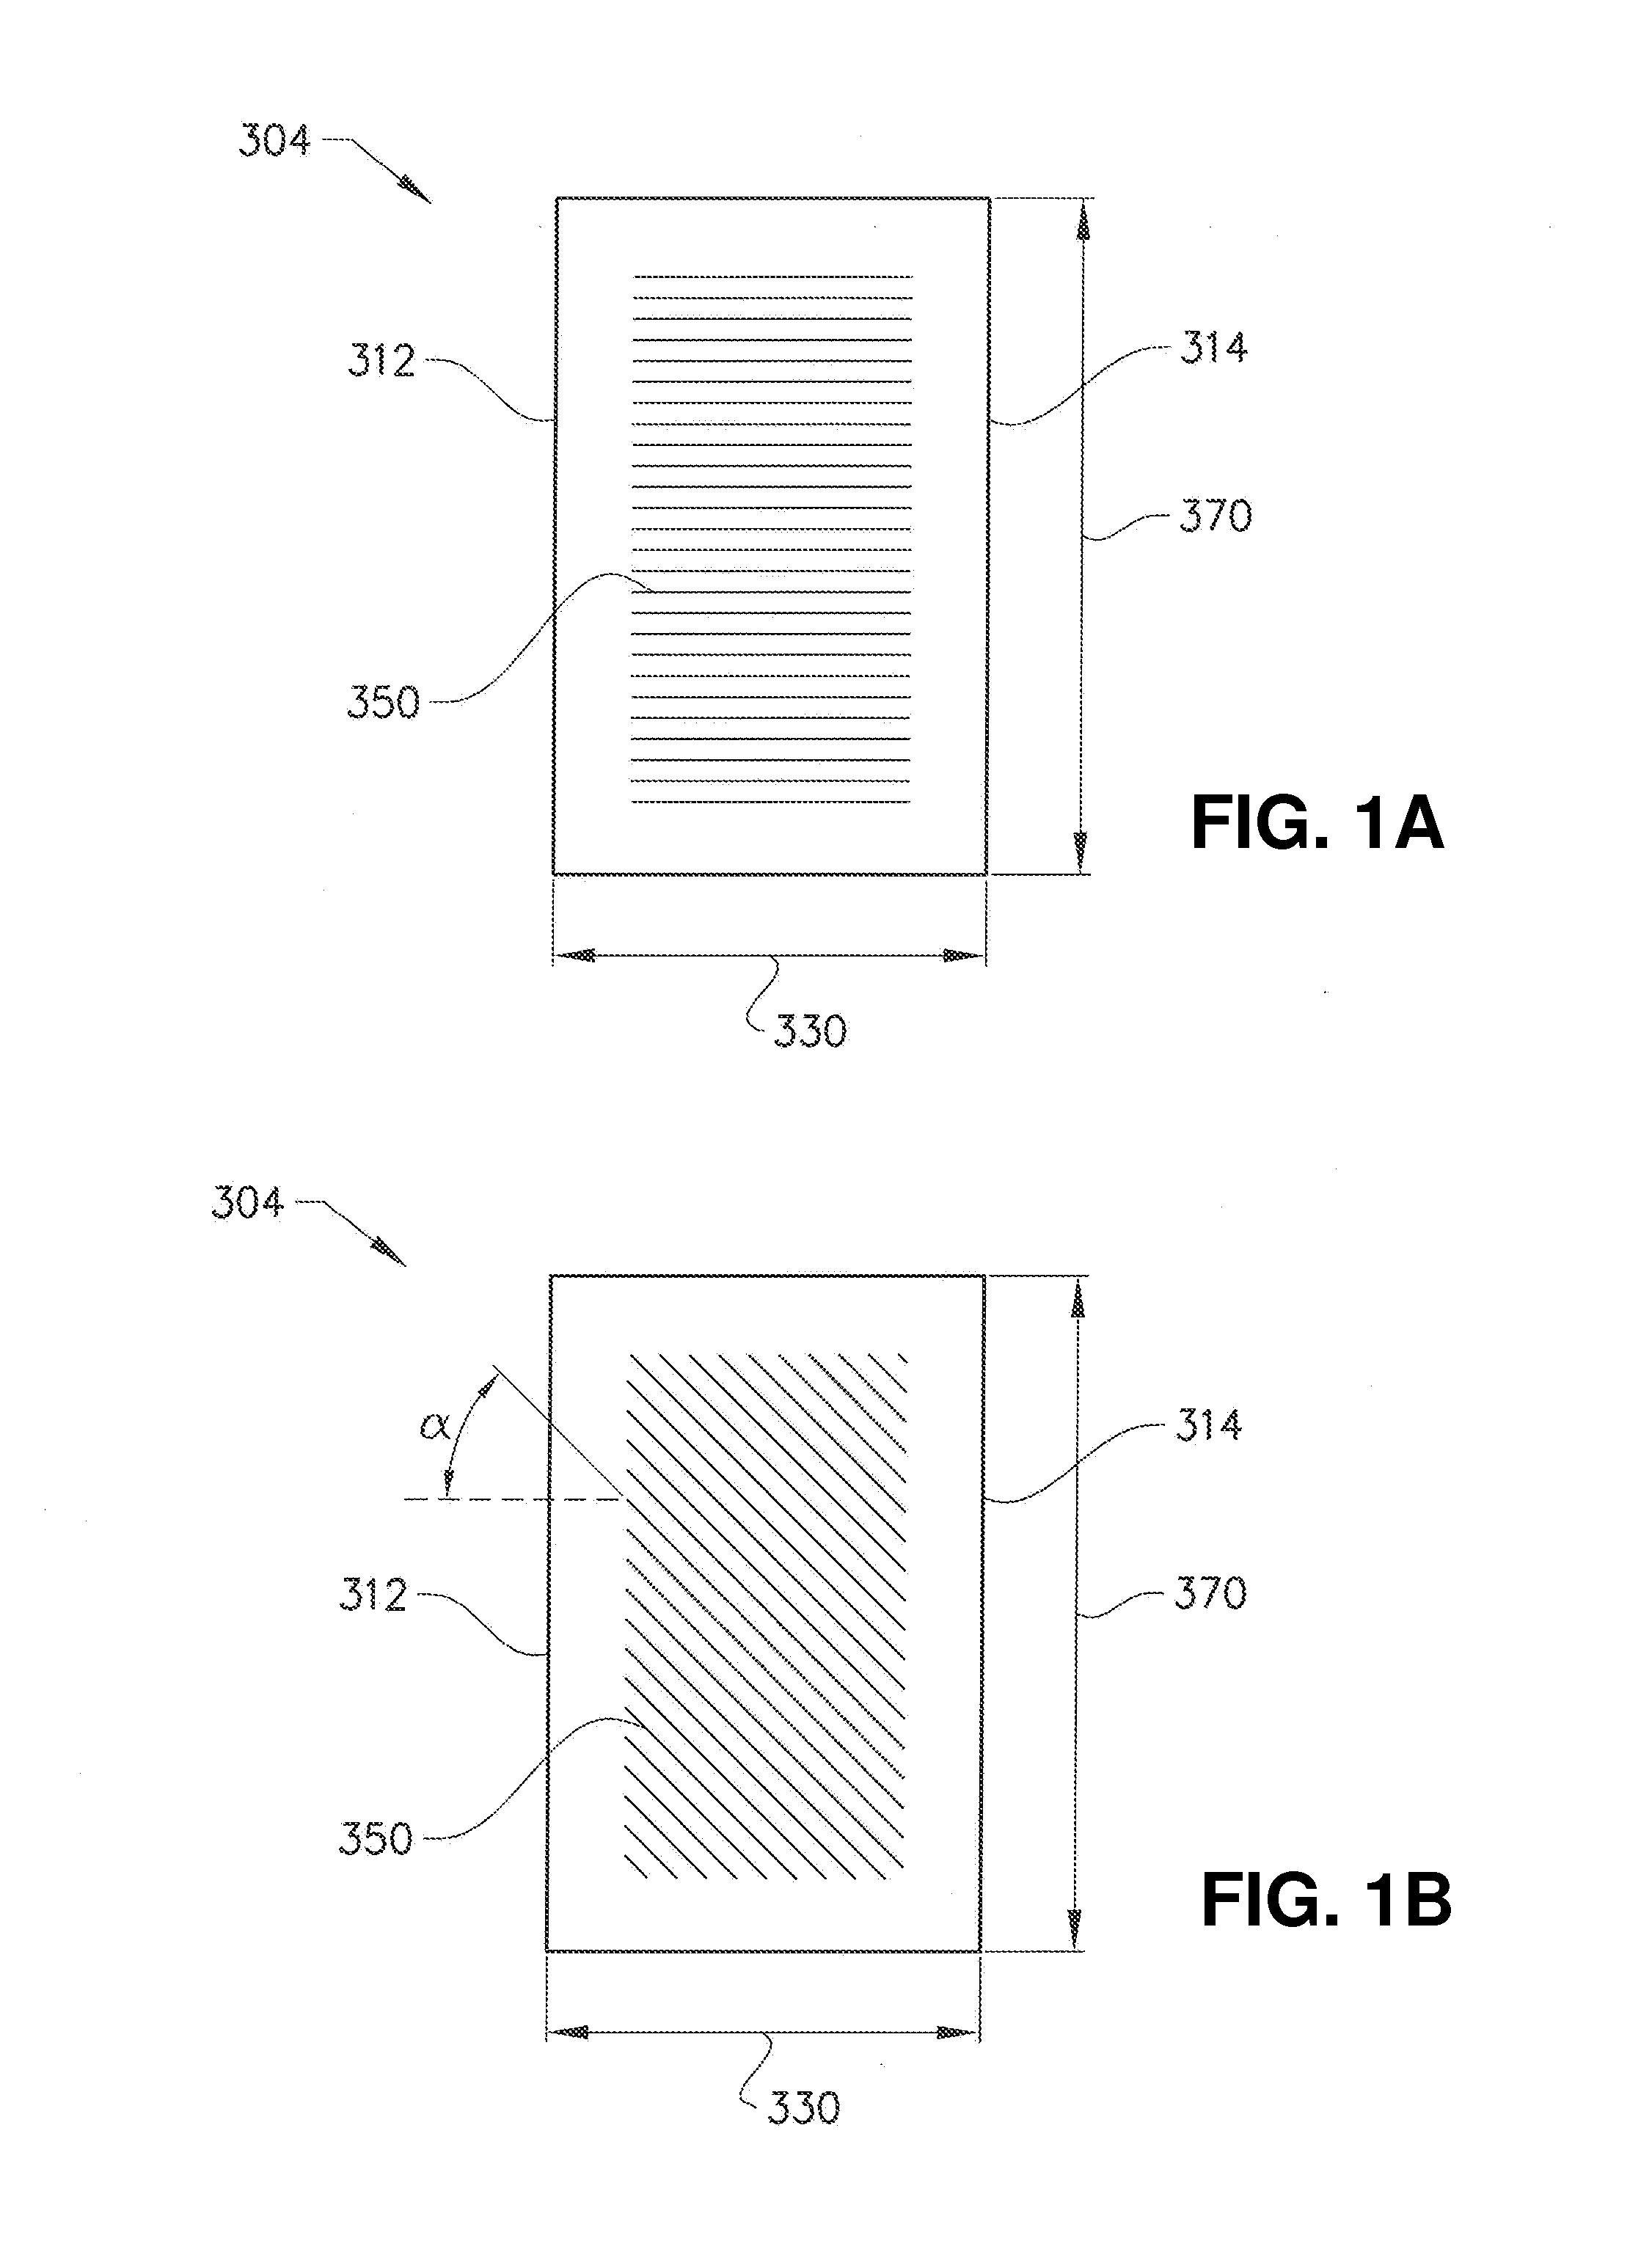 Method and apparatus for forming a three-dimensional article